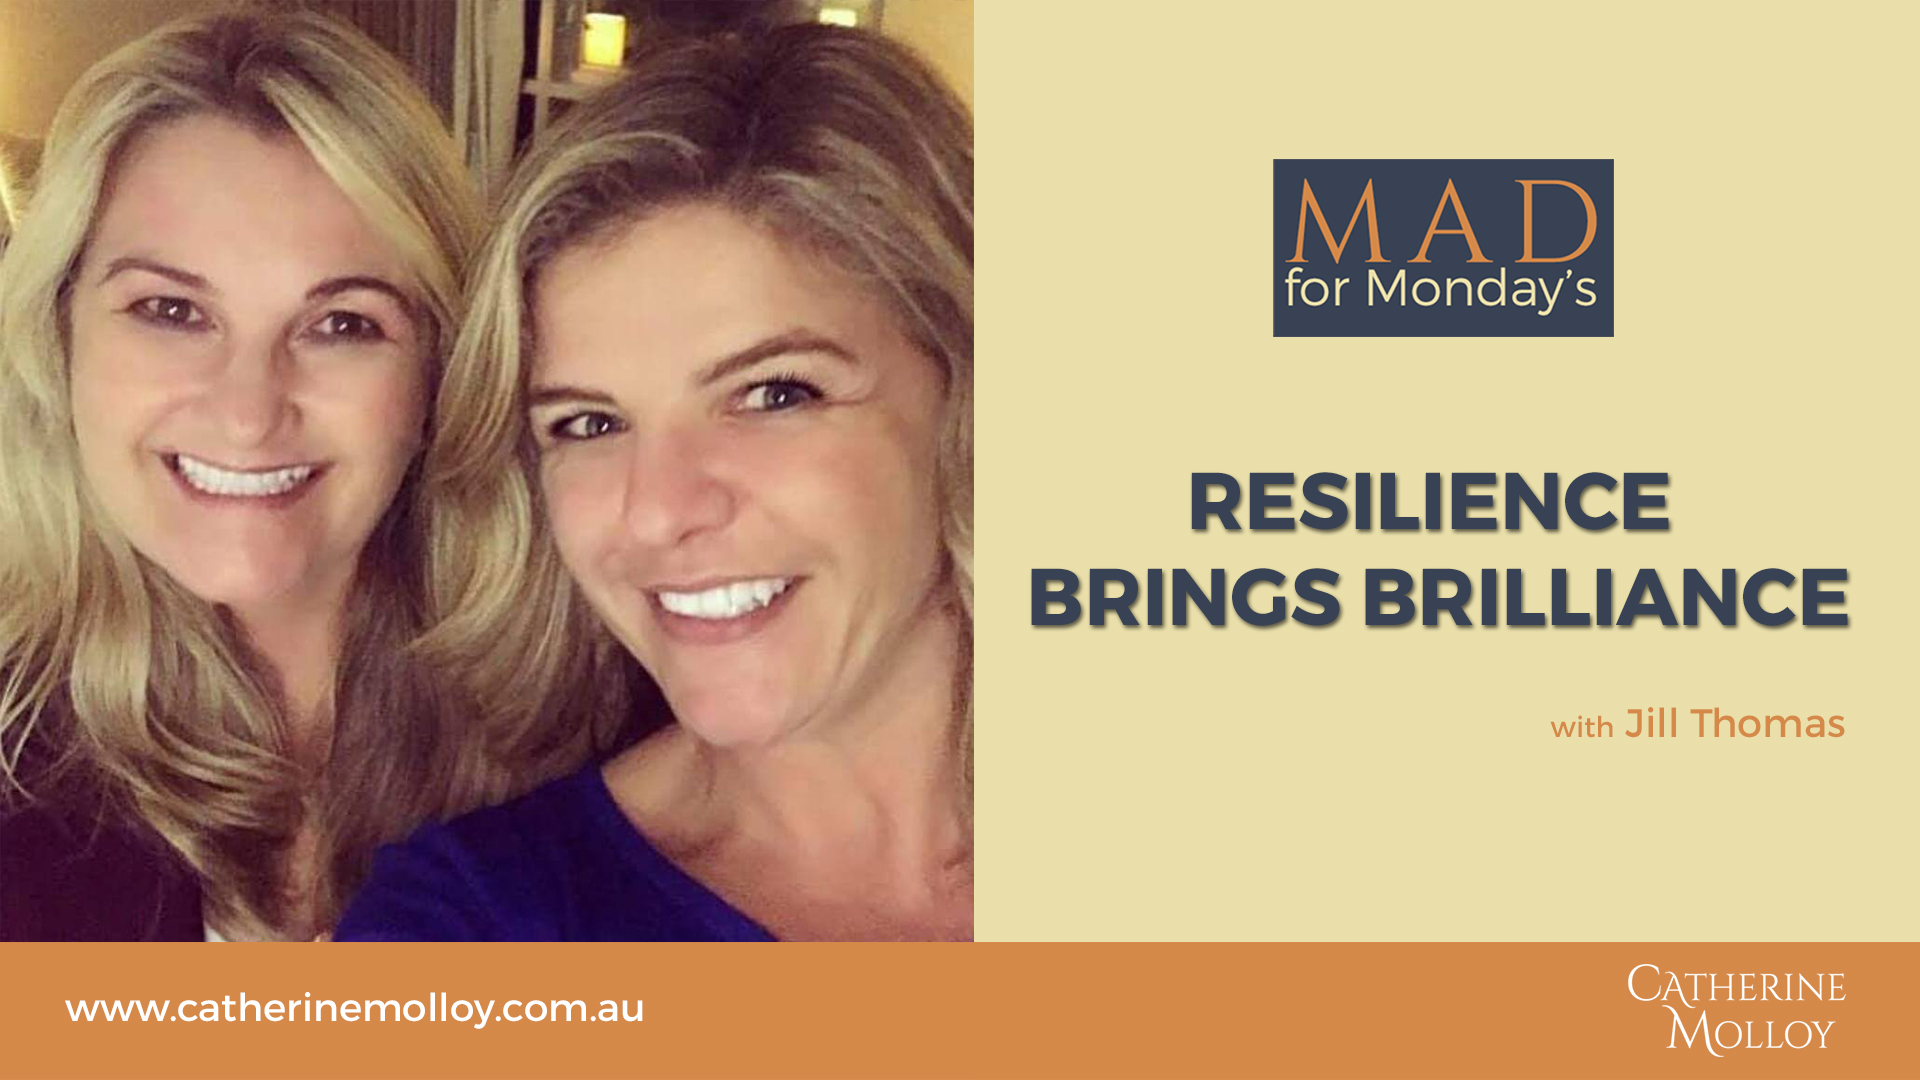 MAD for Monday’s – Resilience brings brilliance